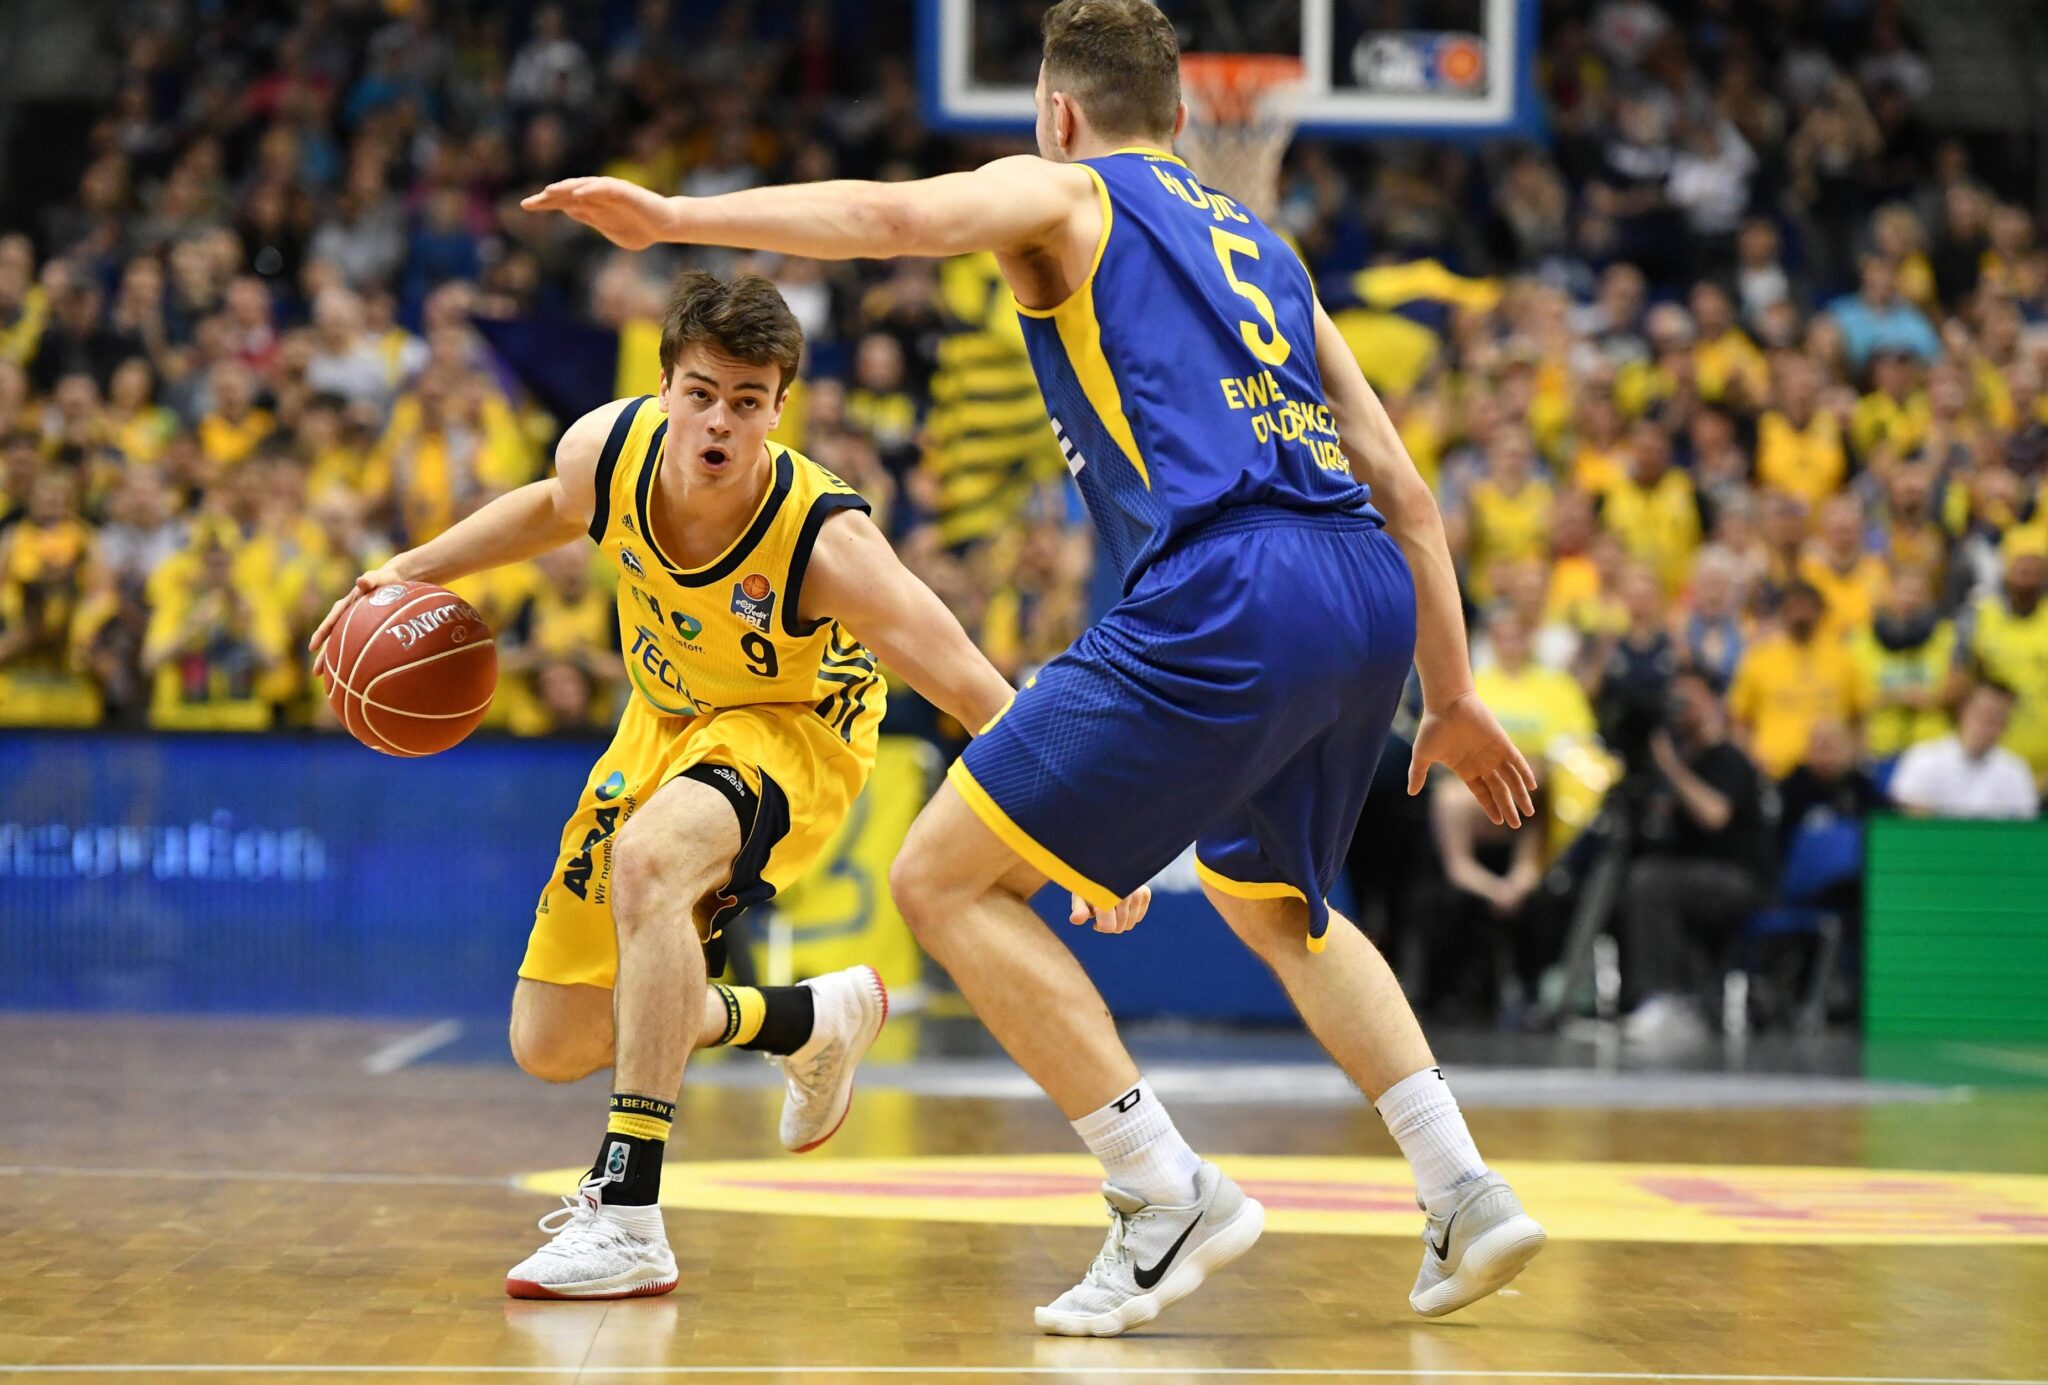 How To Improve Basketball Dribbling - Mastering Ball Handling And The Basketball Team